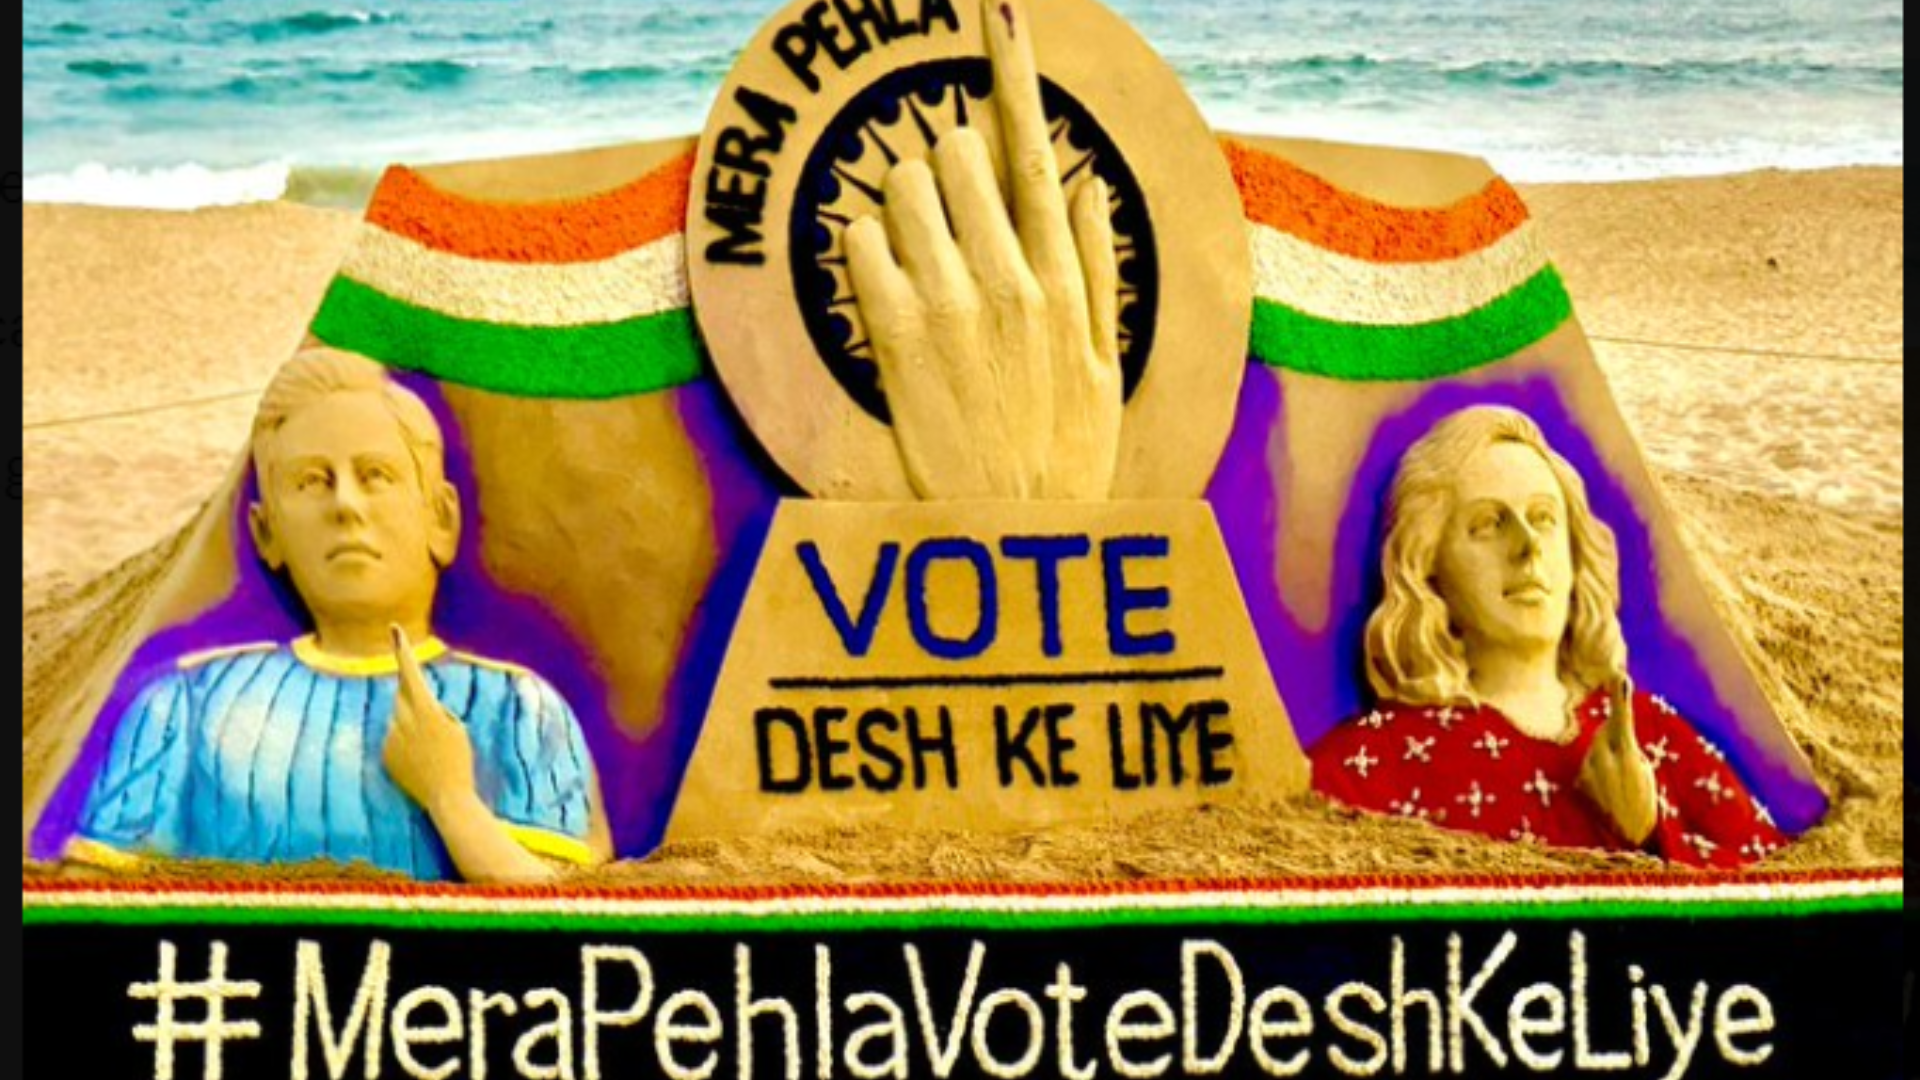 Sudarsan Pattnaik in Odisha Crafts Sand Art to Encourage First-Time Voters